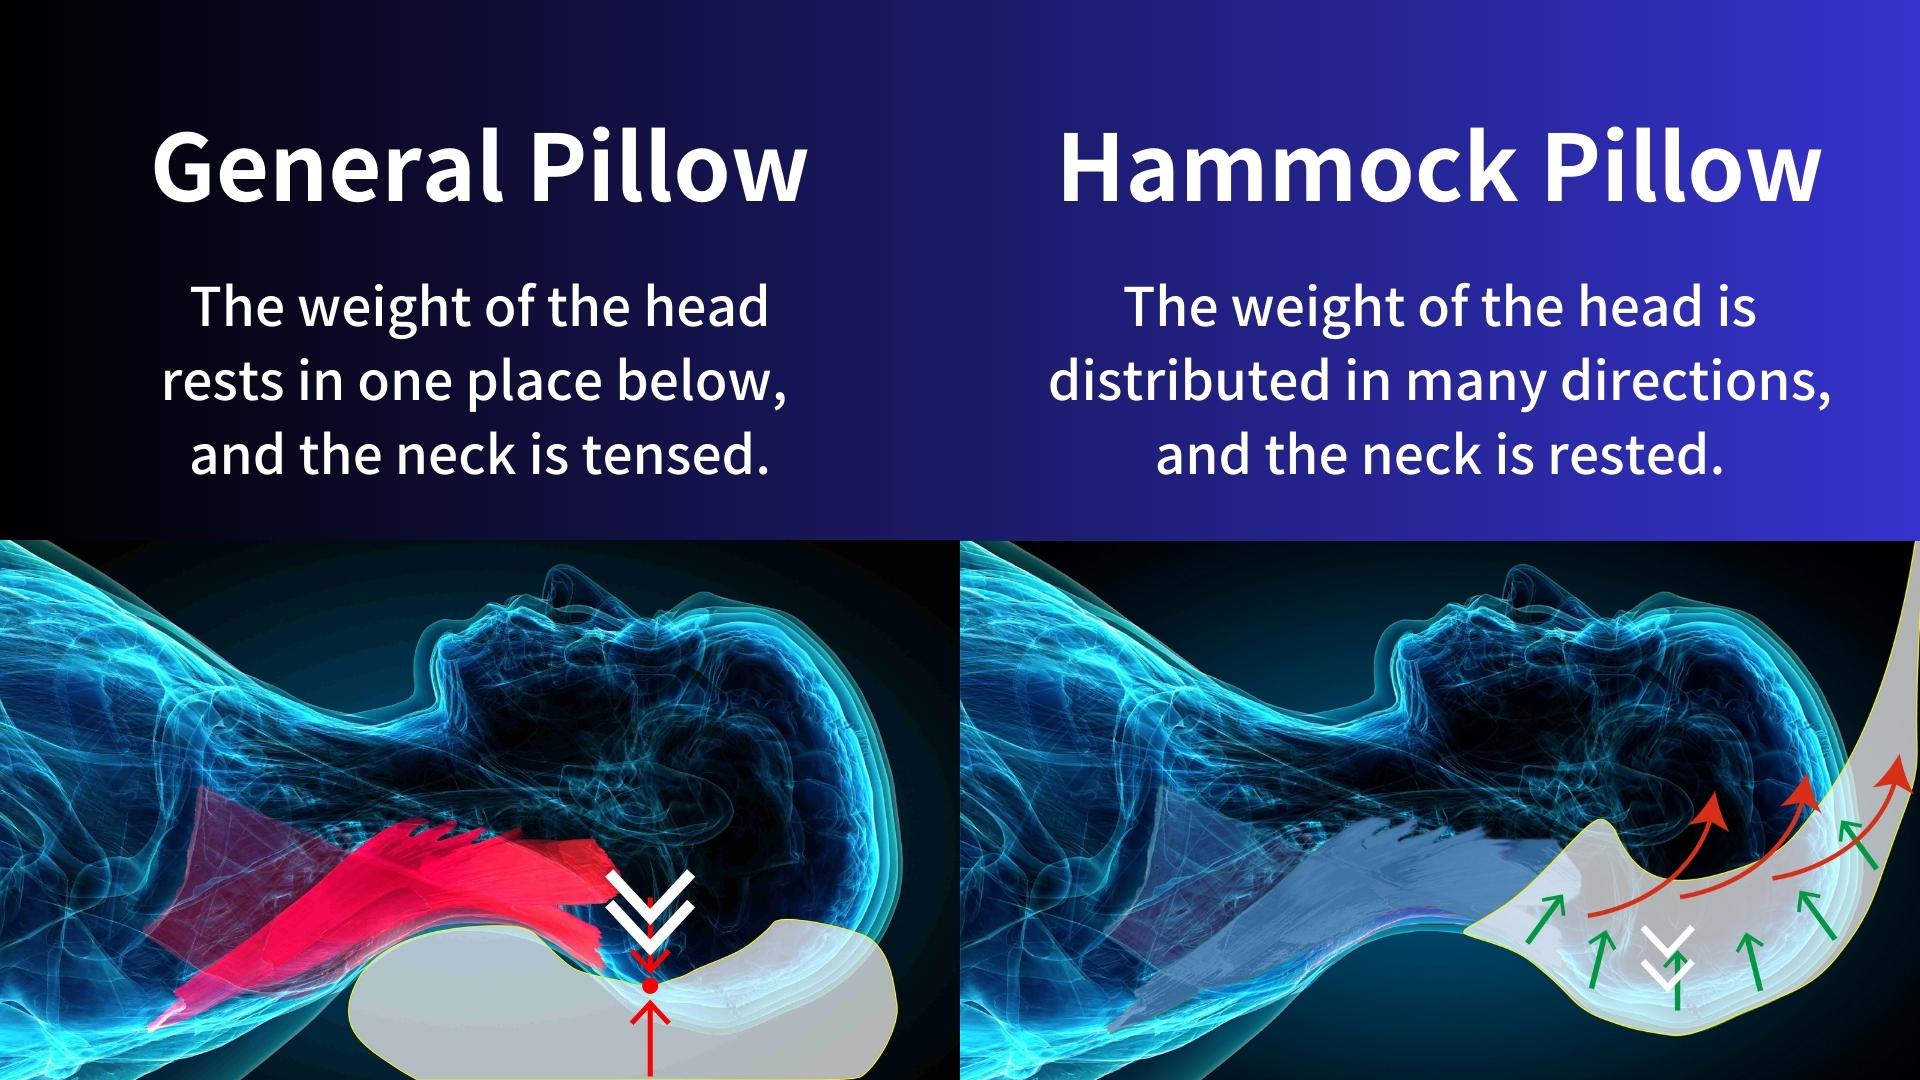 comparing the generalpillows and the hammock pillow